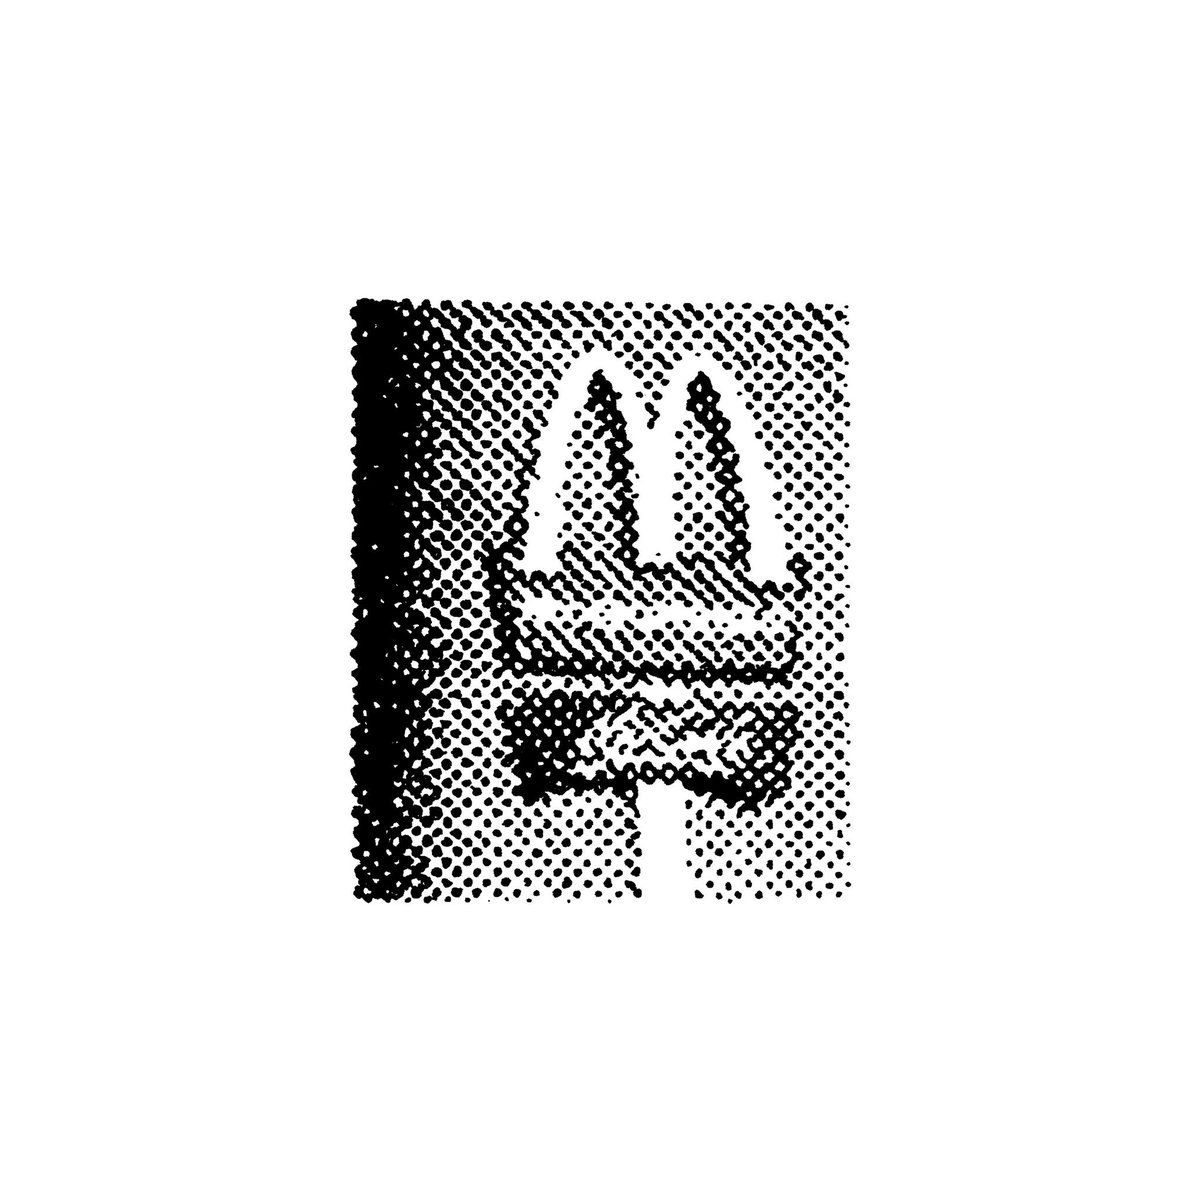 Warhol S Landfill On Twitter Look For The Golden Arches 1960